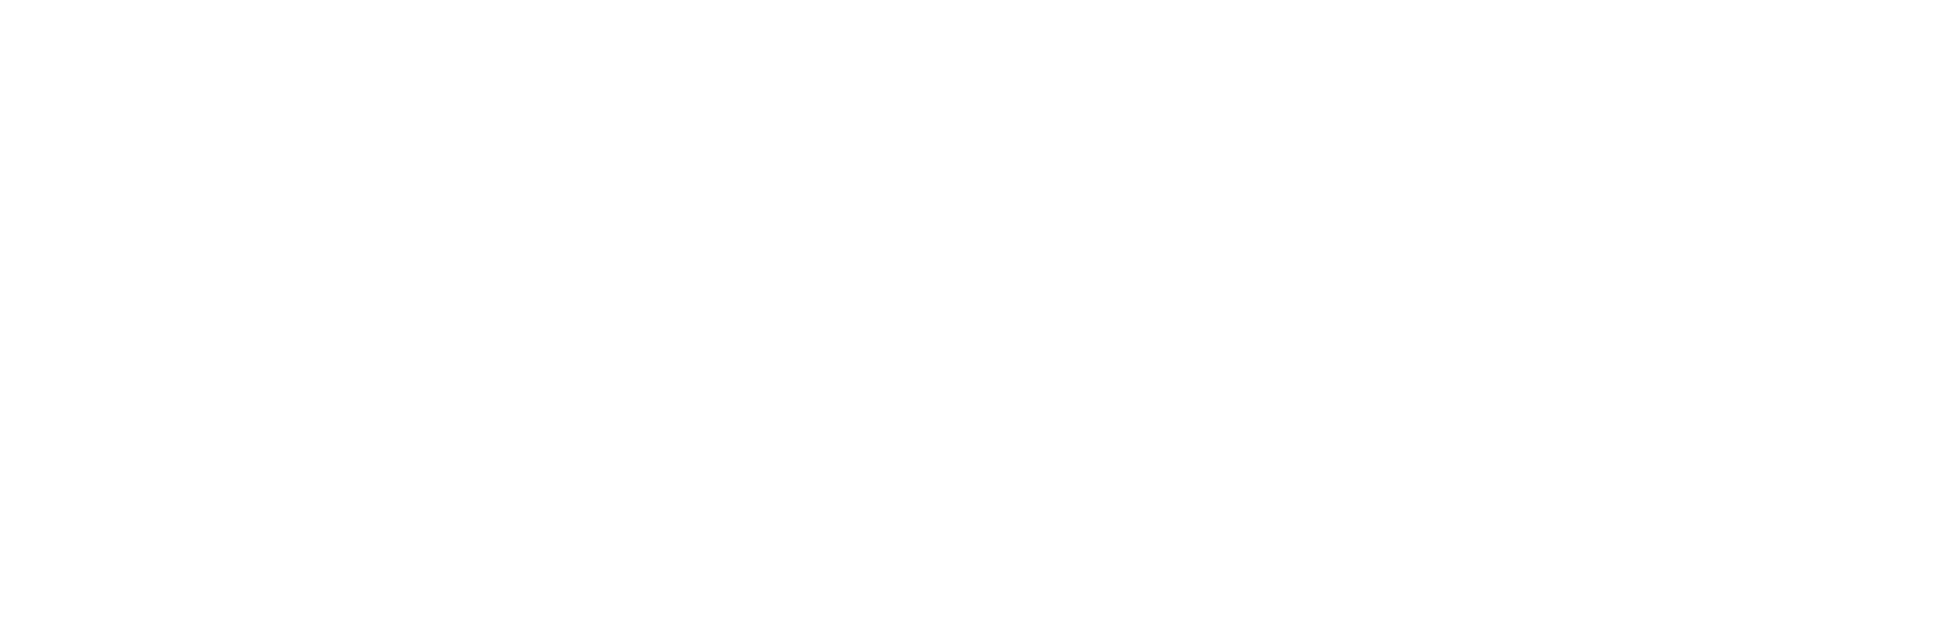 Invest In Shropshire | Economic Recovery